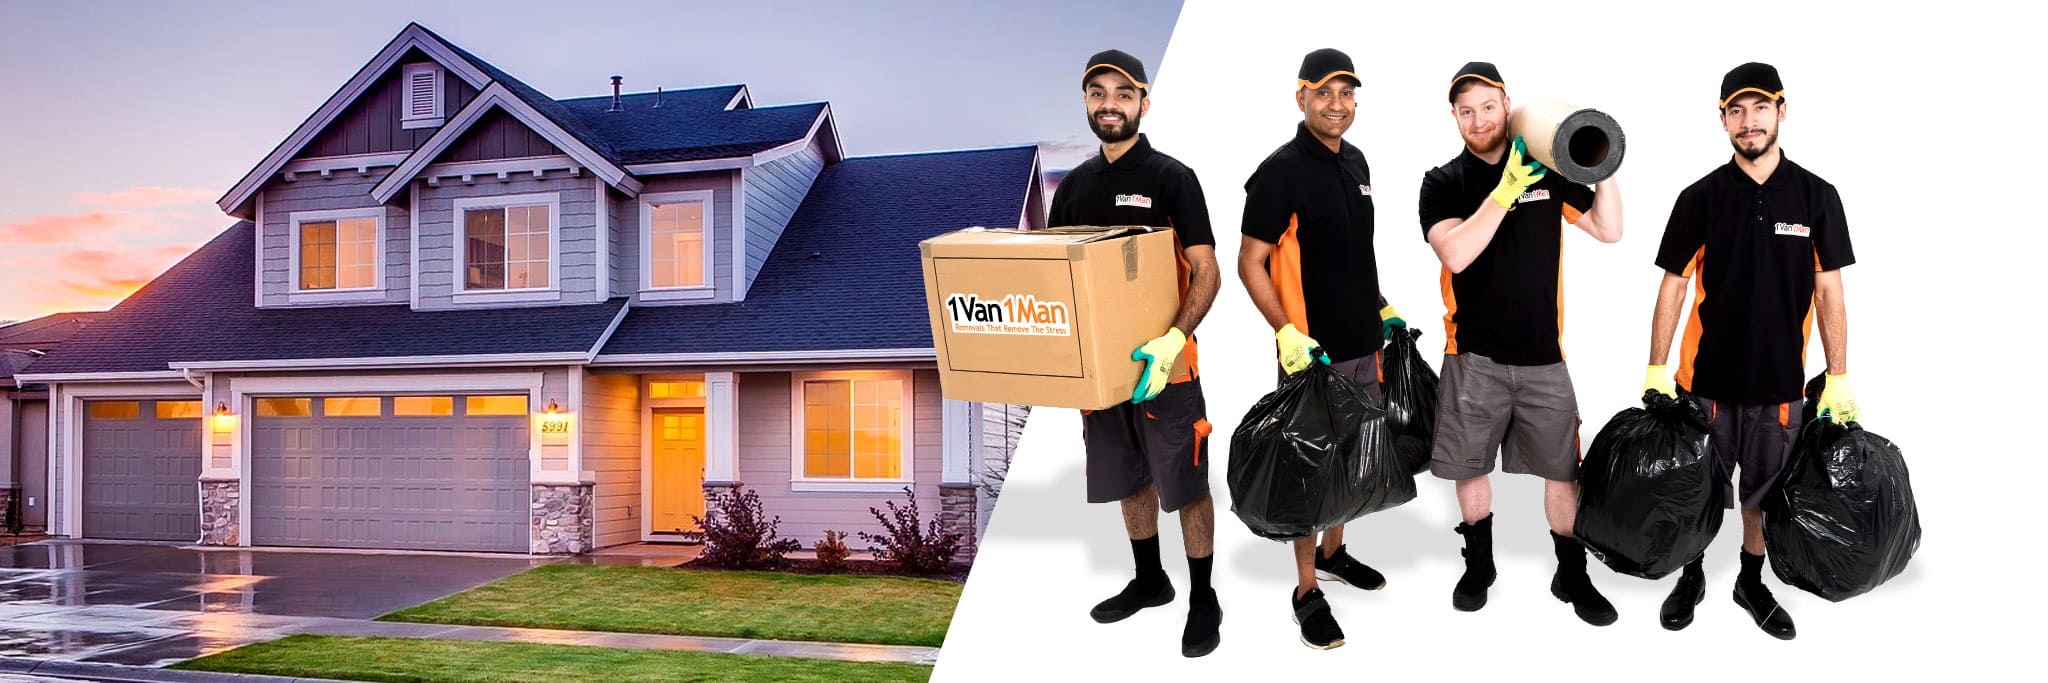 House Clearance Removal Services in York